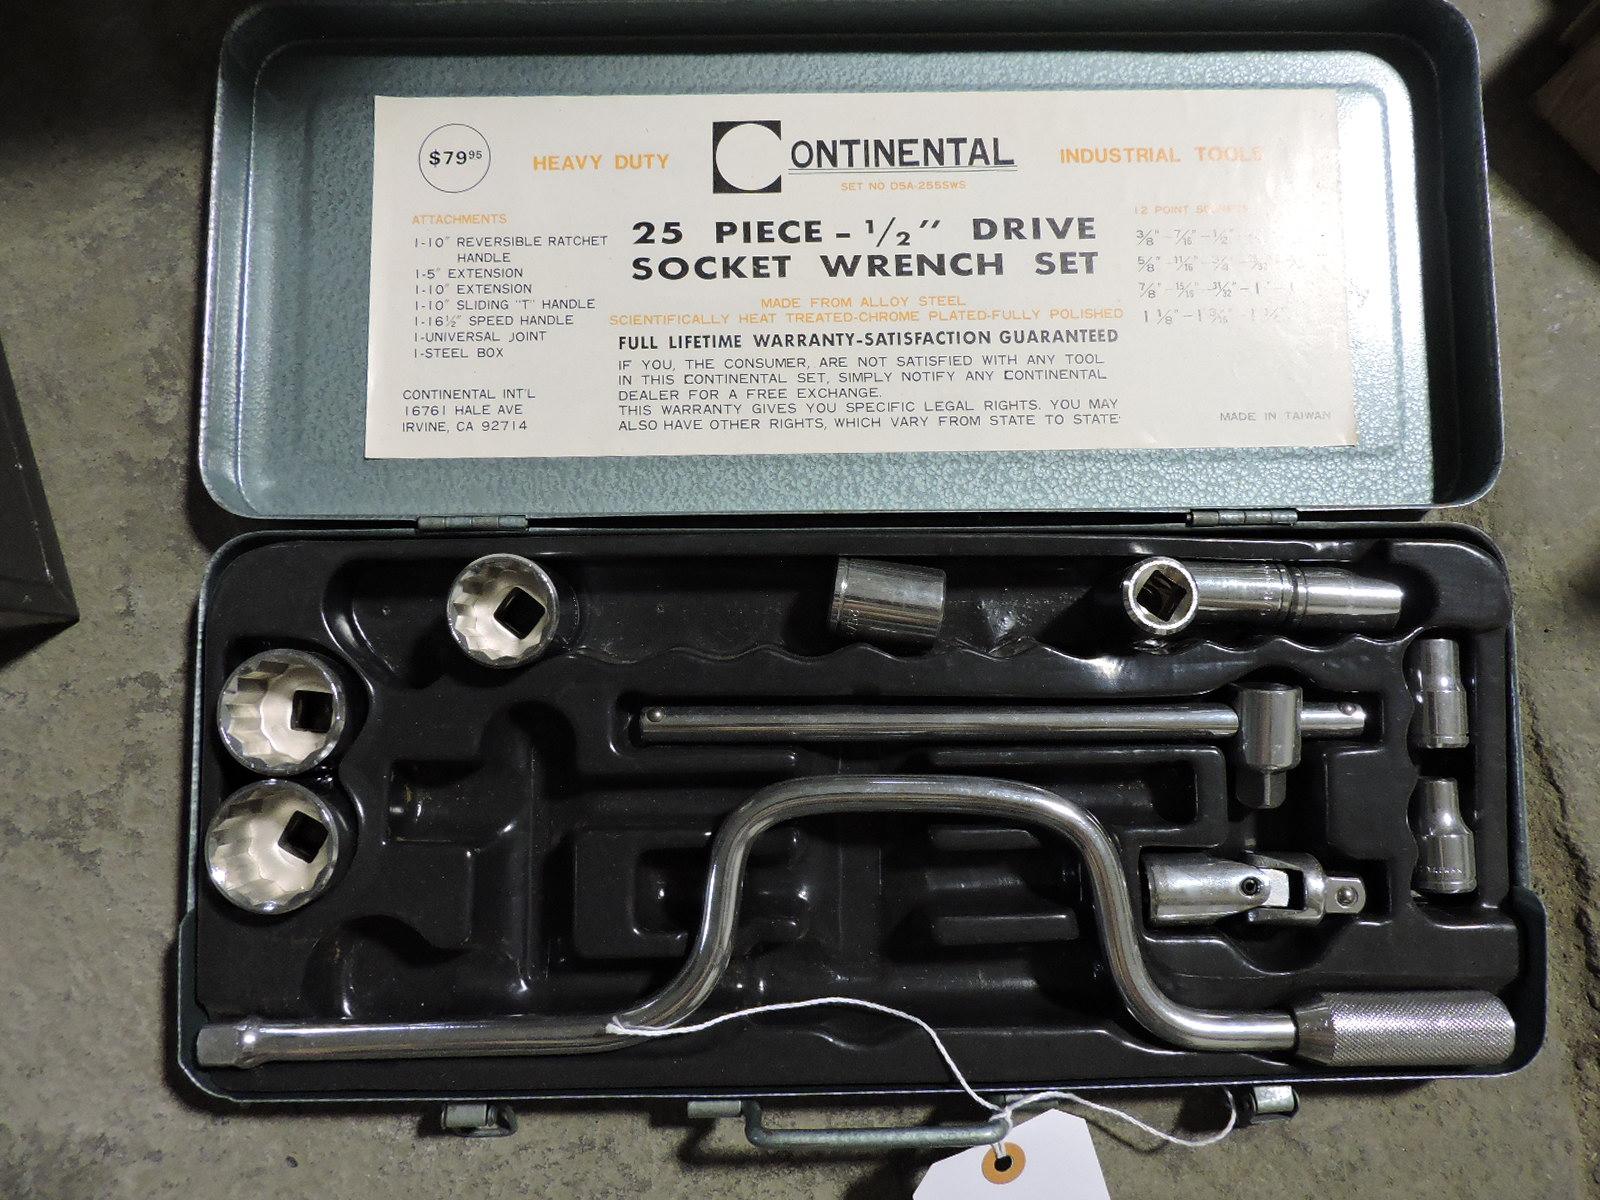 CONTINENTAL 1/2" Drive Socket Wrench Set (Missing Pieces) - NEW